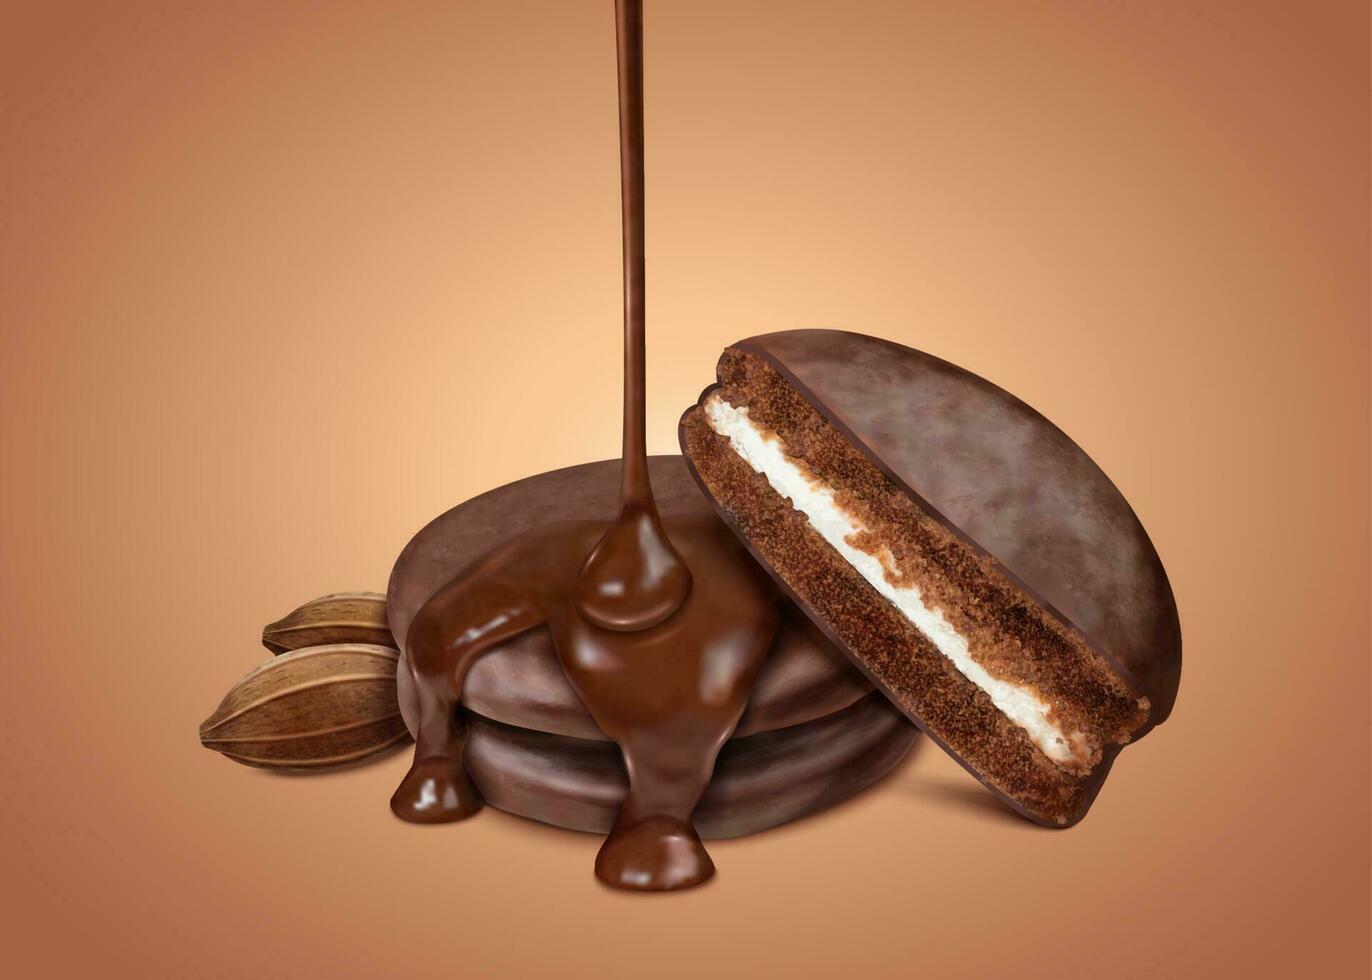 Choco pie with dripping chocolate syrup and cocoa nut in 3d illustration isolated on brown background vector